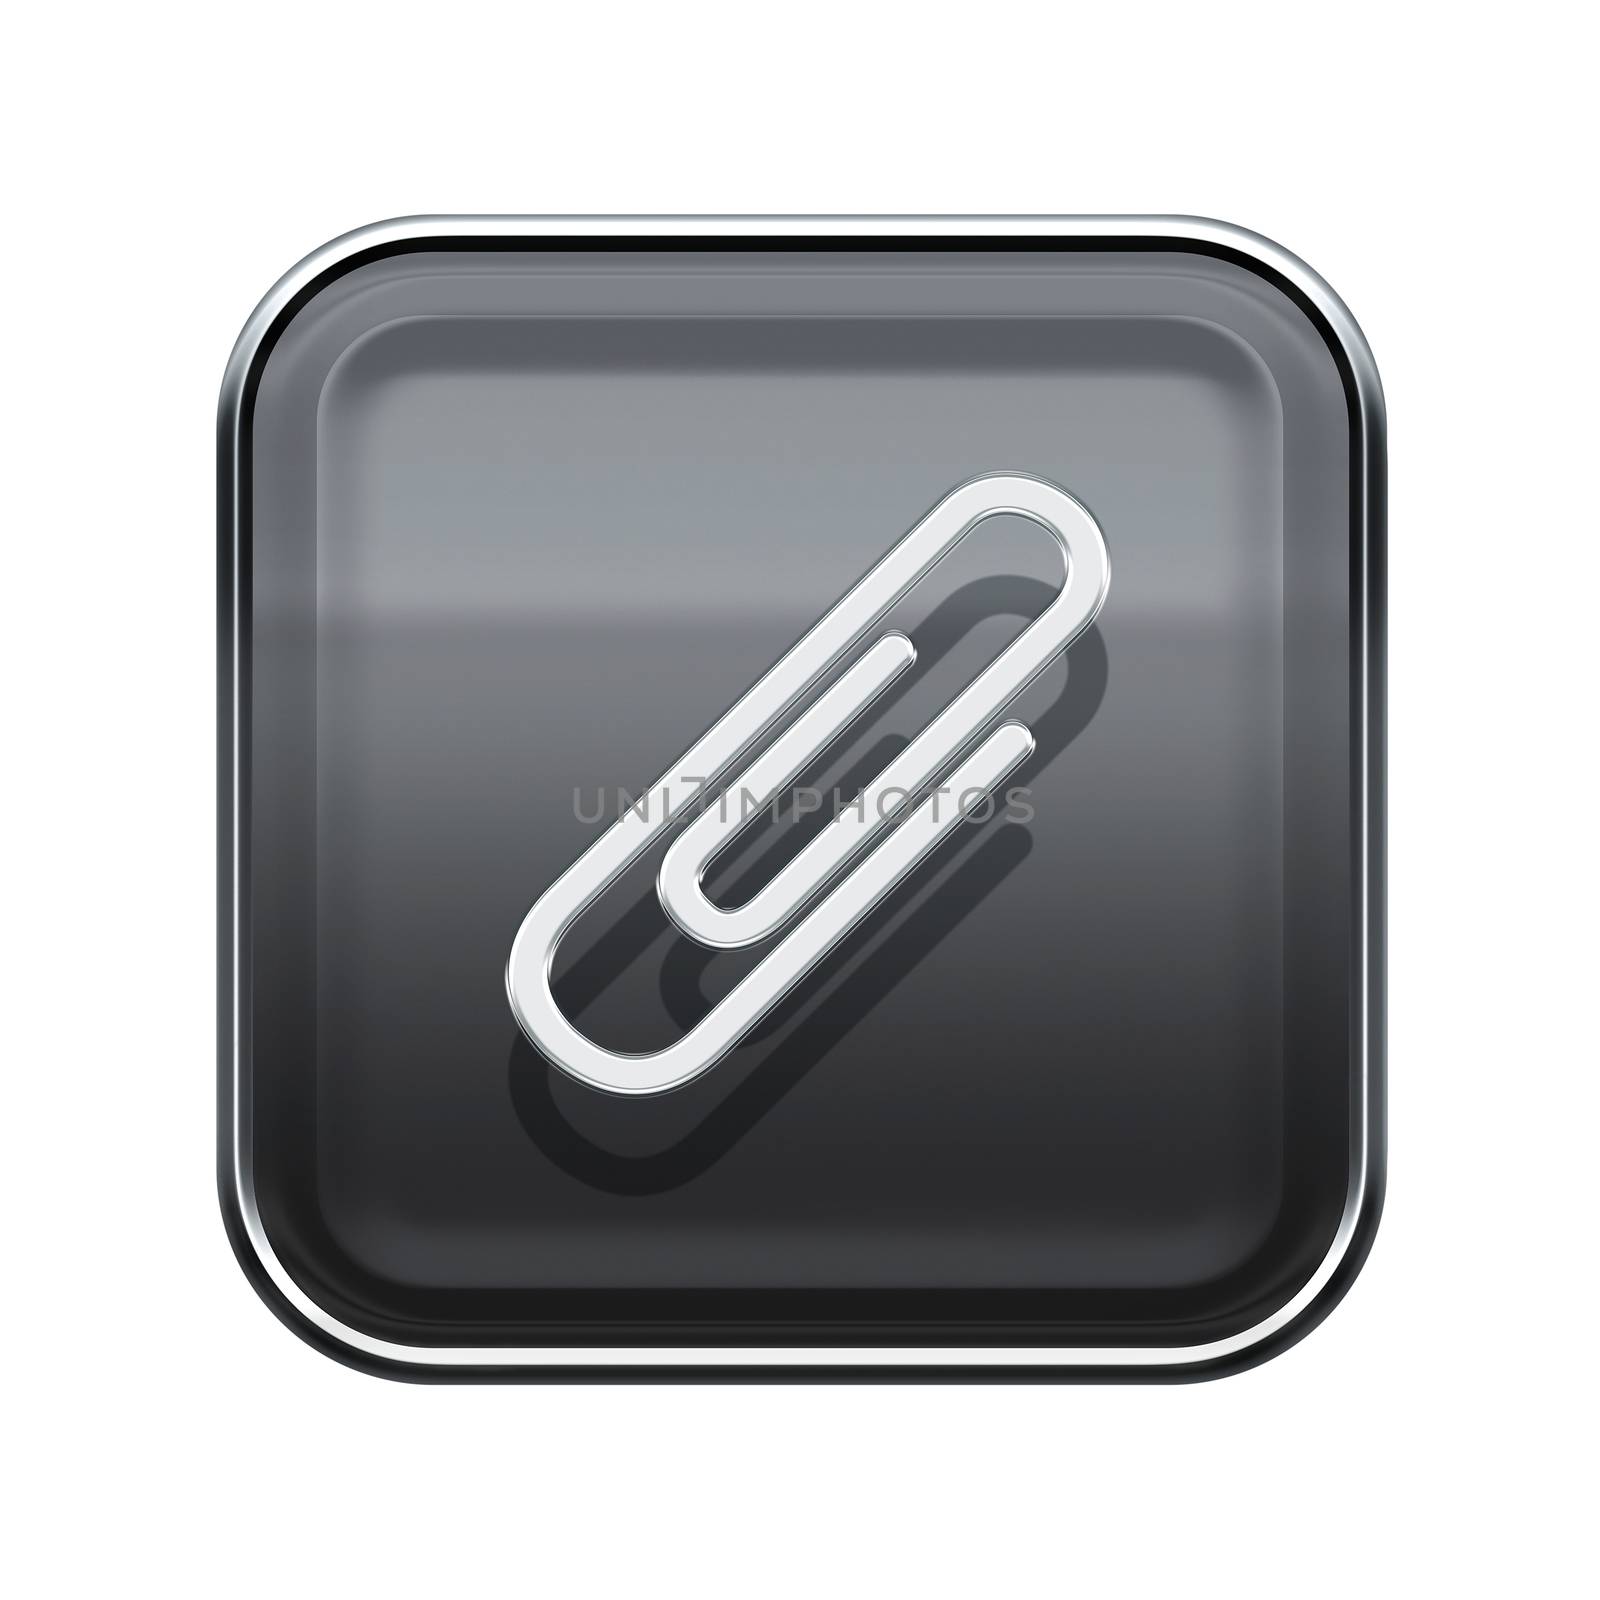 Paper clip icon glossy grey, isolated on white background by zeffss